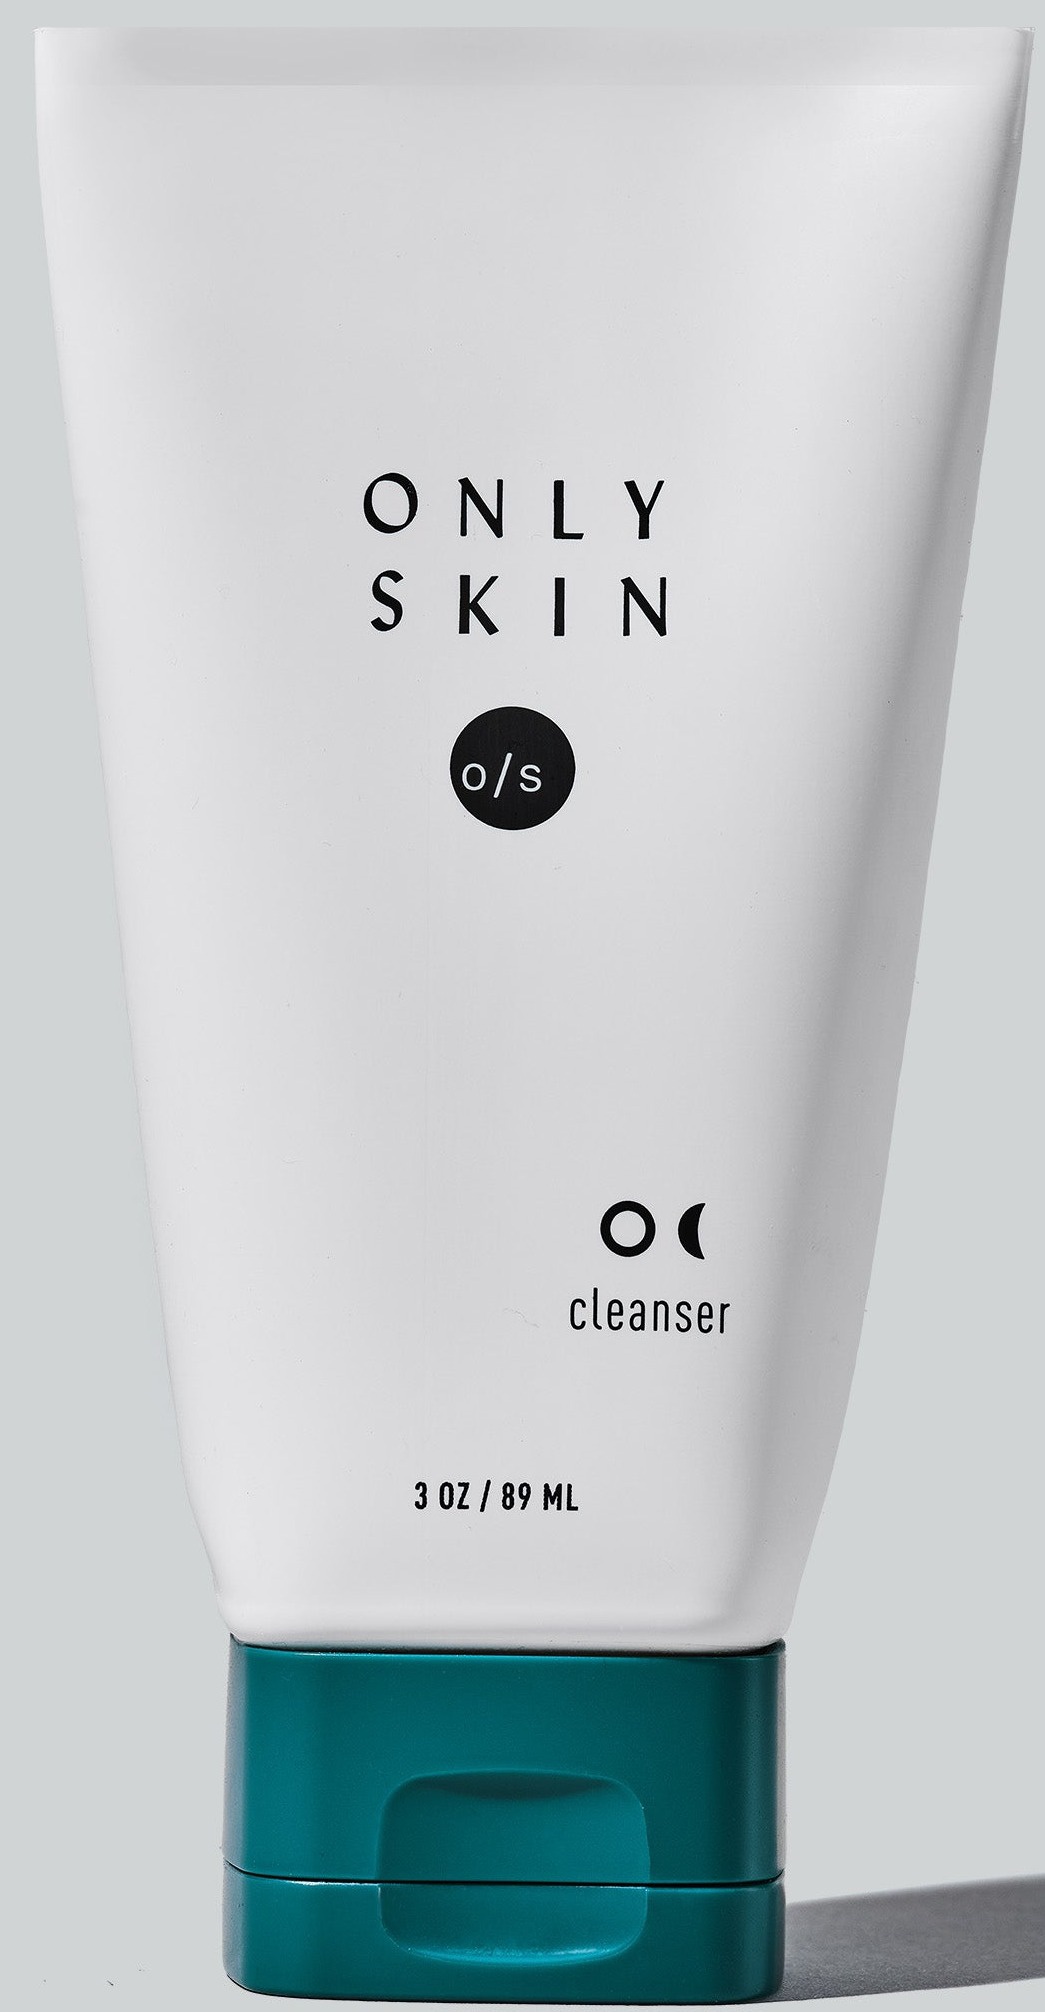 Only Skin Cleanser